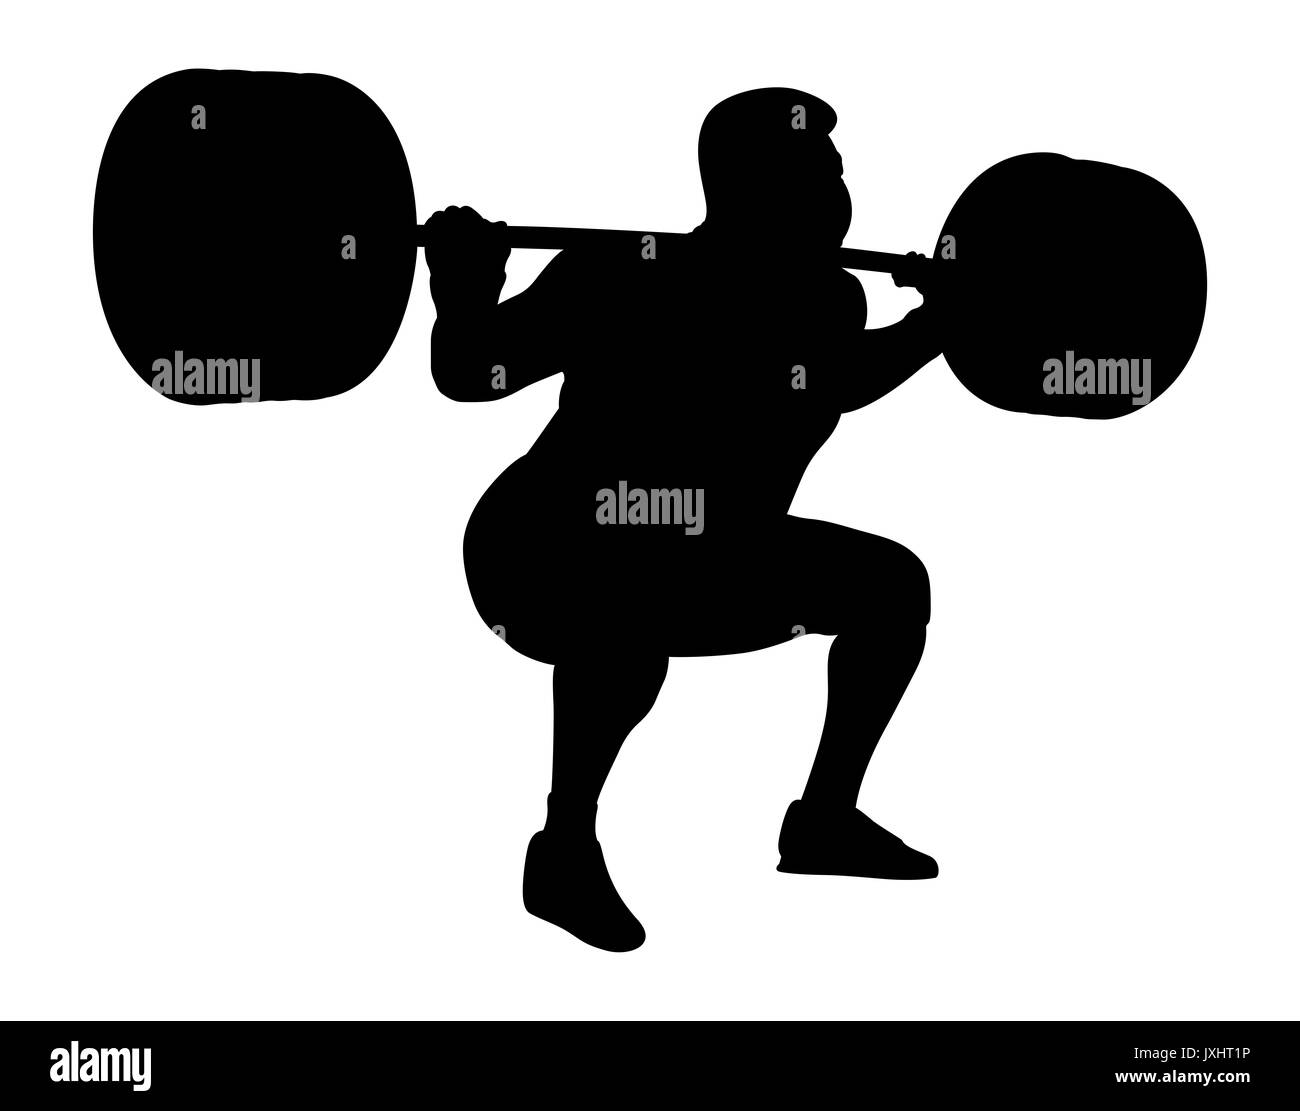 male powerlifter competition in powerlifting black silhouette Stock Photo